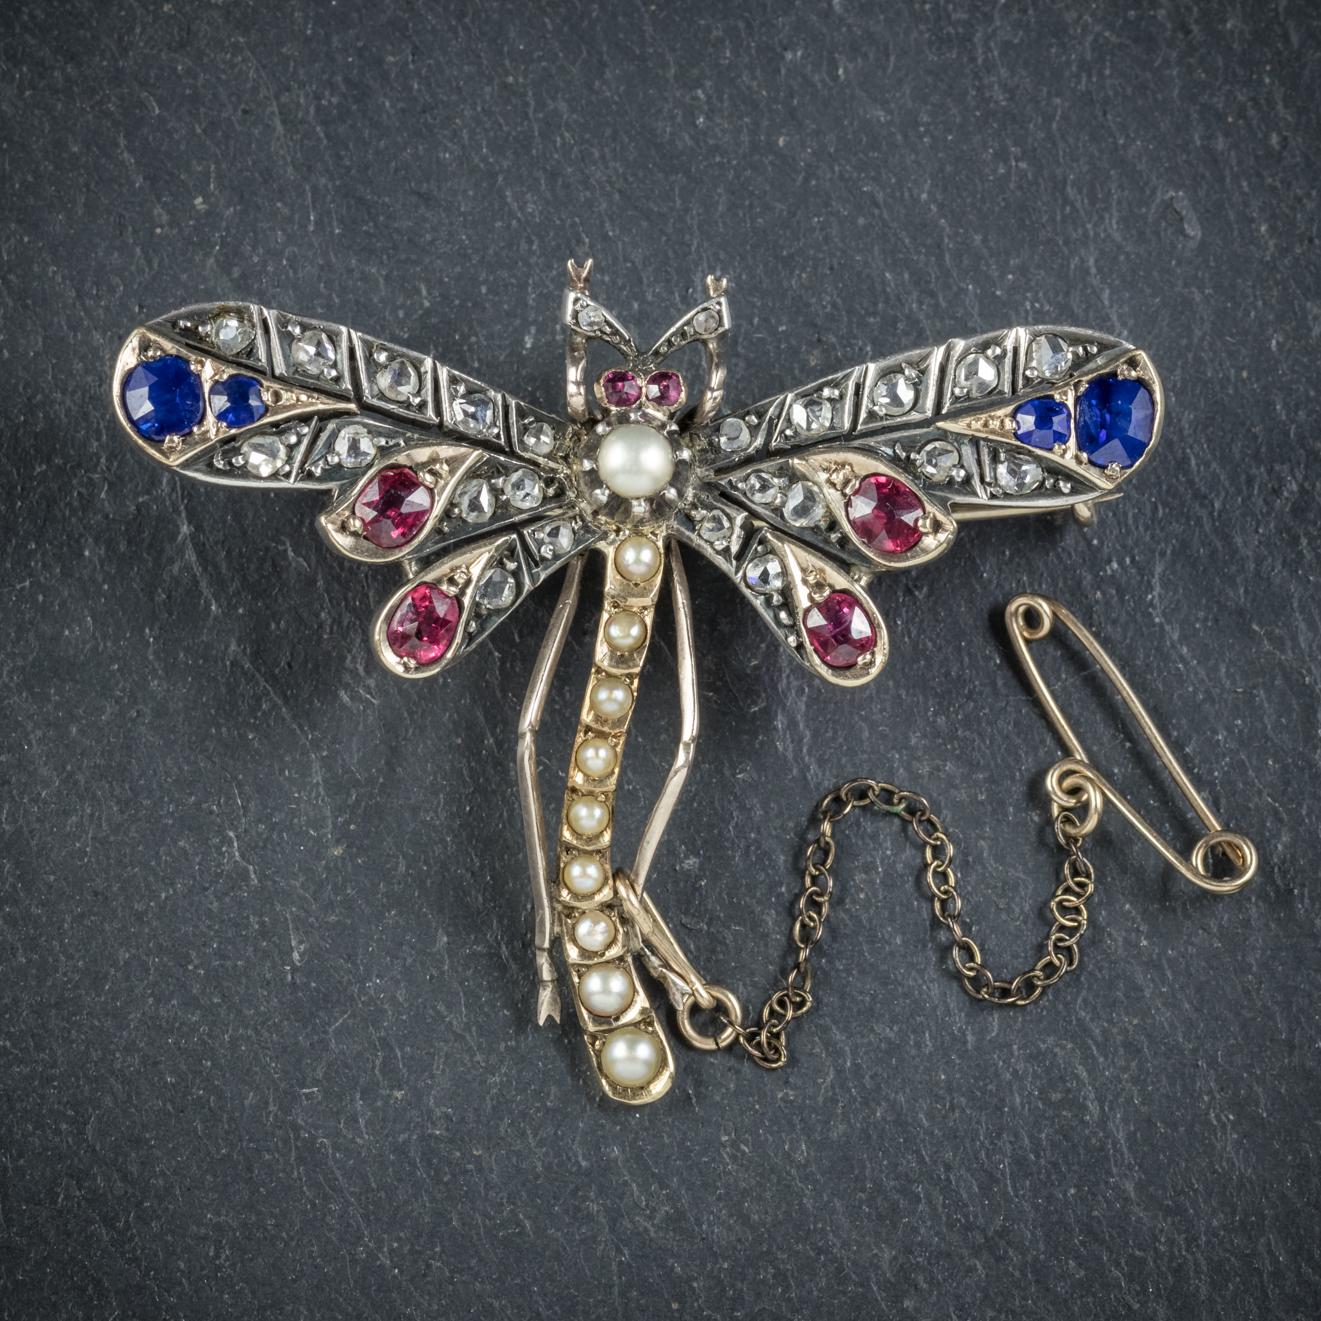 This delightful antique gemstone Dragonfly brooch was beautifully made during the Victorian era, Circa 1900. 

The lovely Insects wings are decorated in approx. 0.30ct of Sapphire, 0.40ct of Ruby and 0.80ct of rose cut Diamond with a line of Pearls